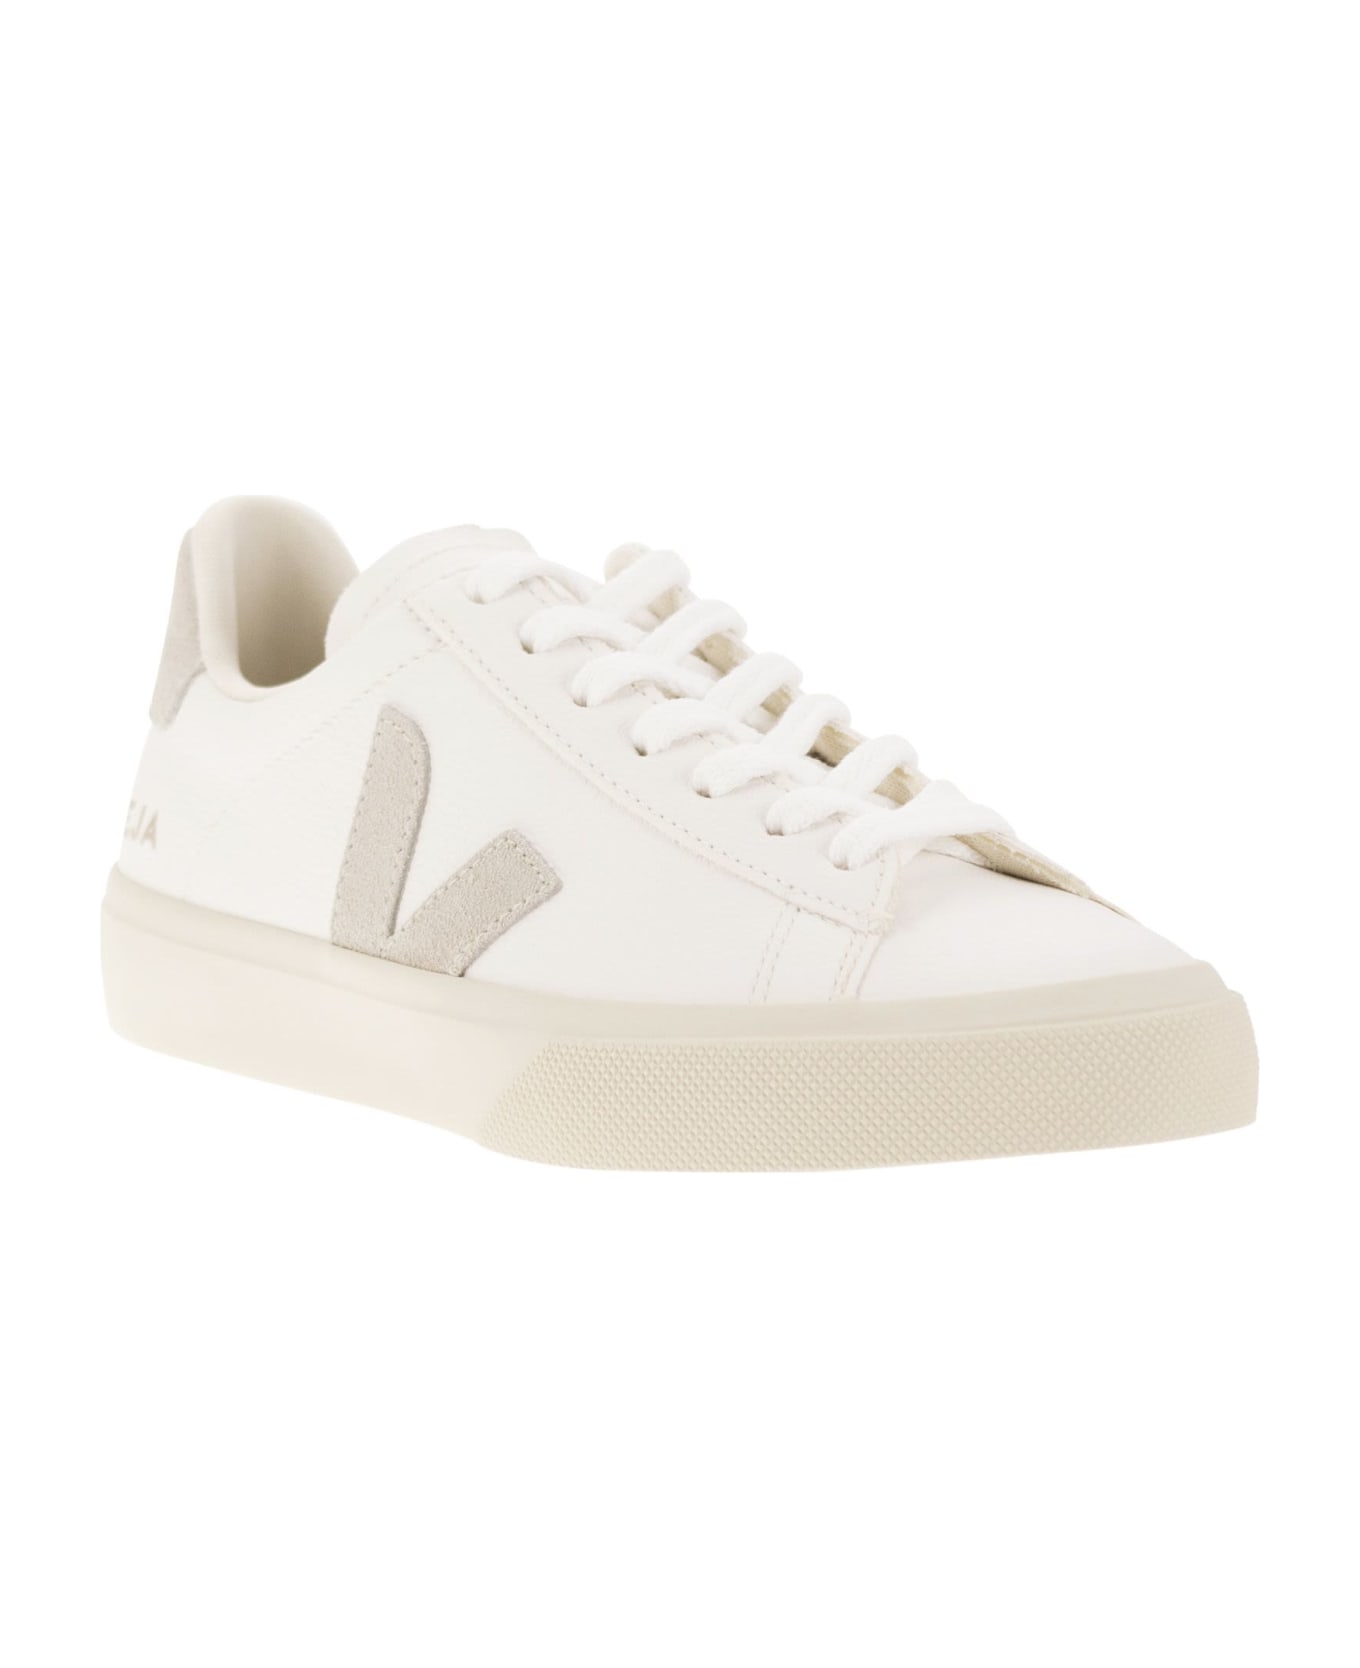 Veja Chromefree Leather Trainers - White/natural